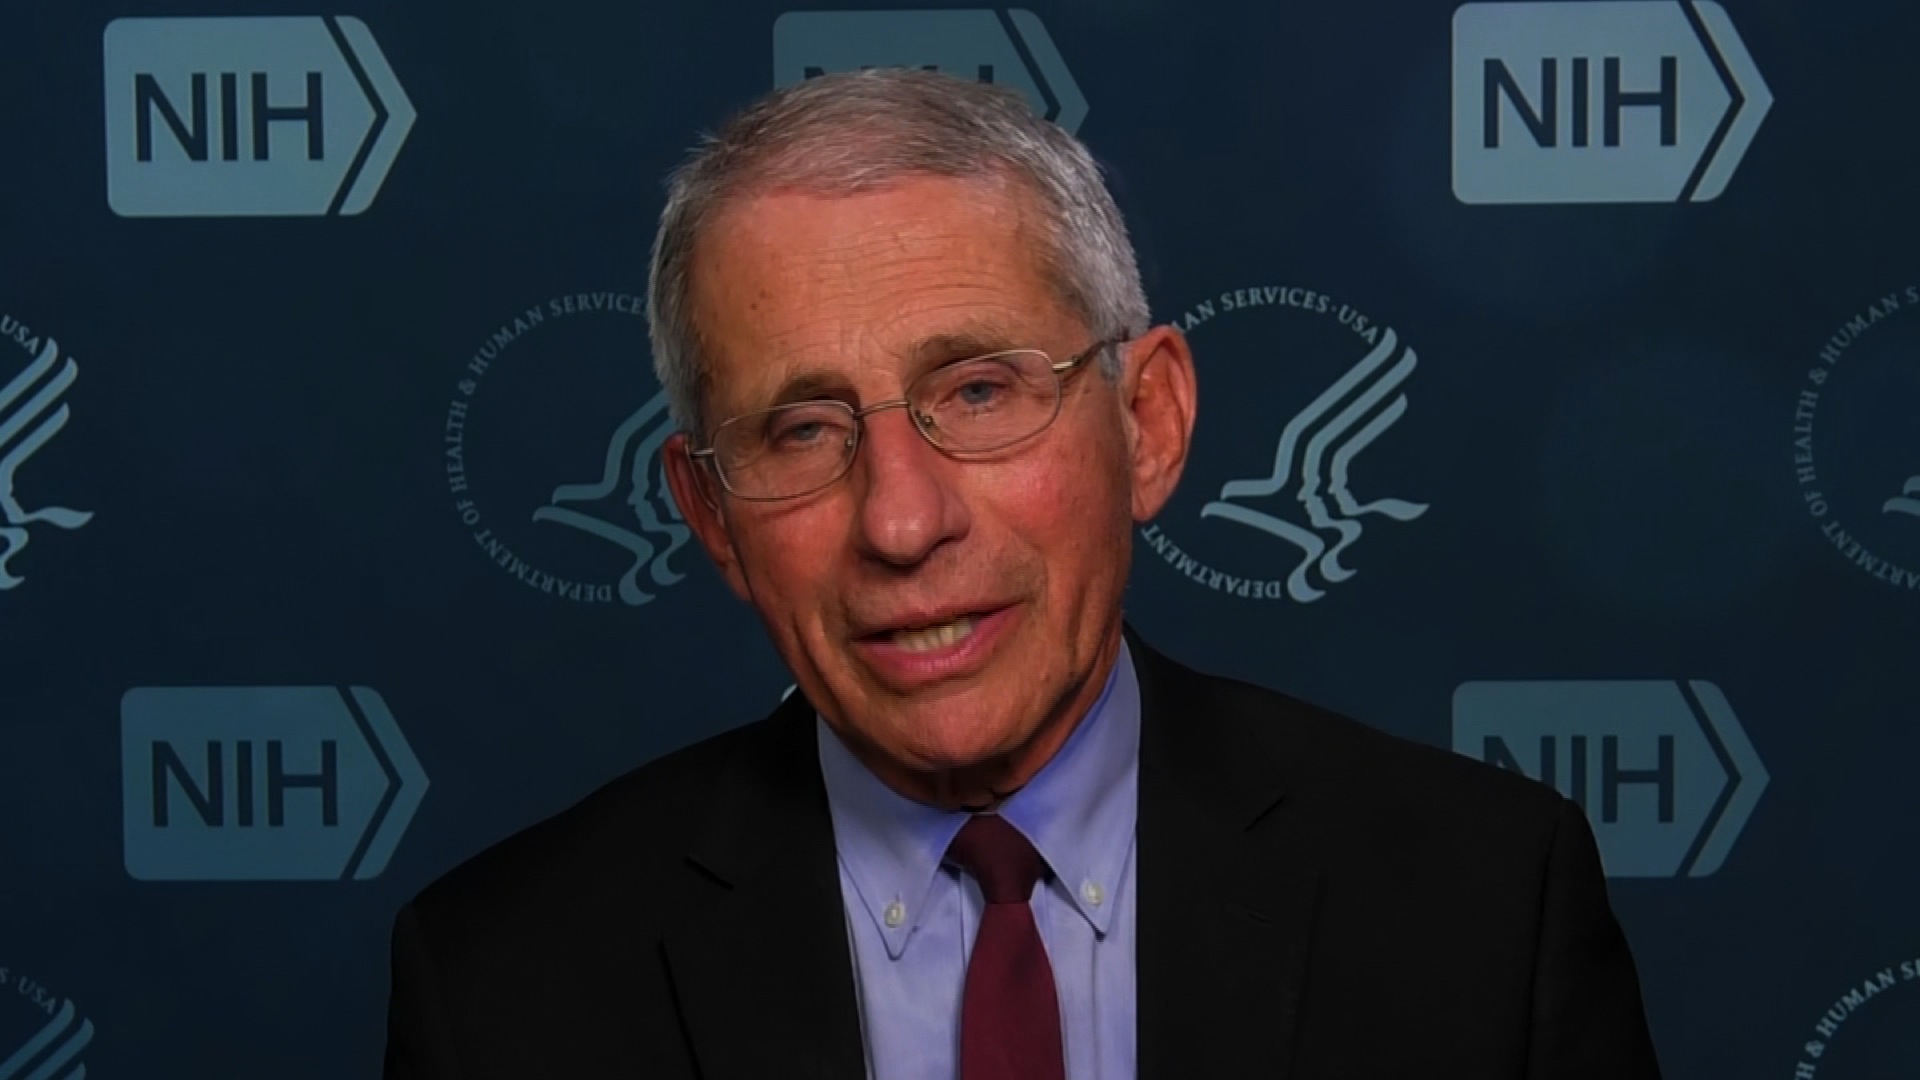 Fauci Lands Book Deal, What about Wuhan?